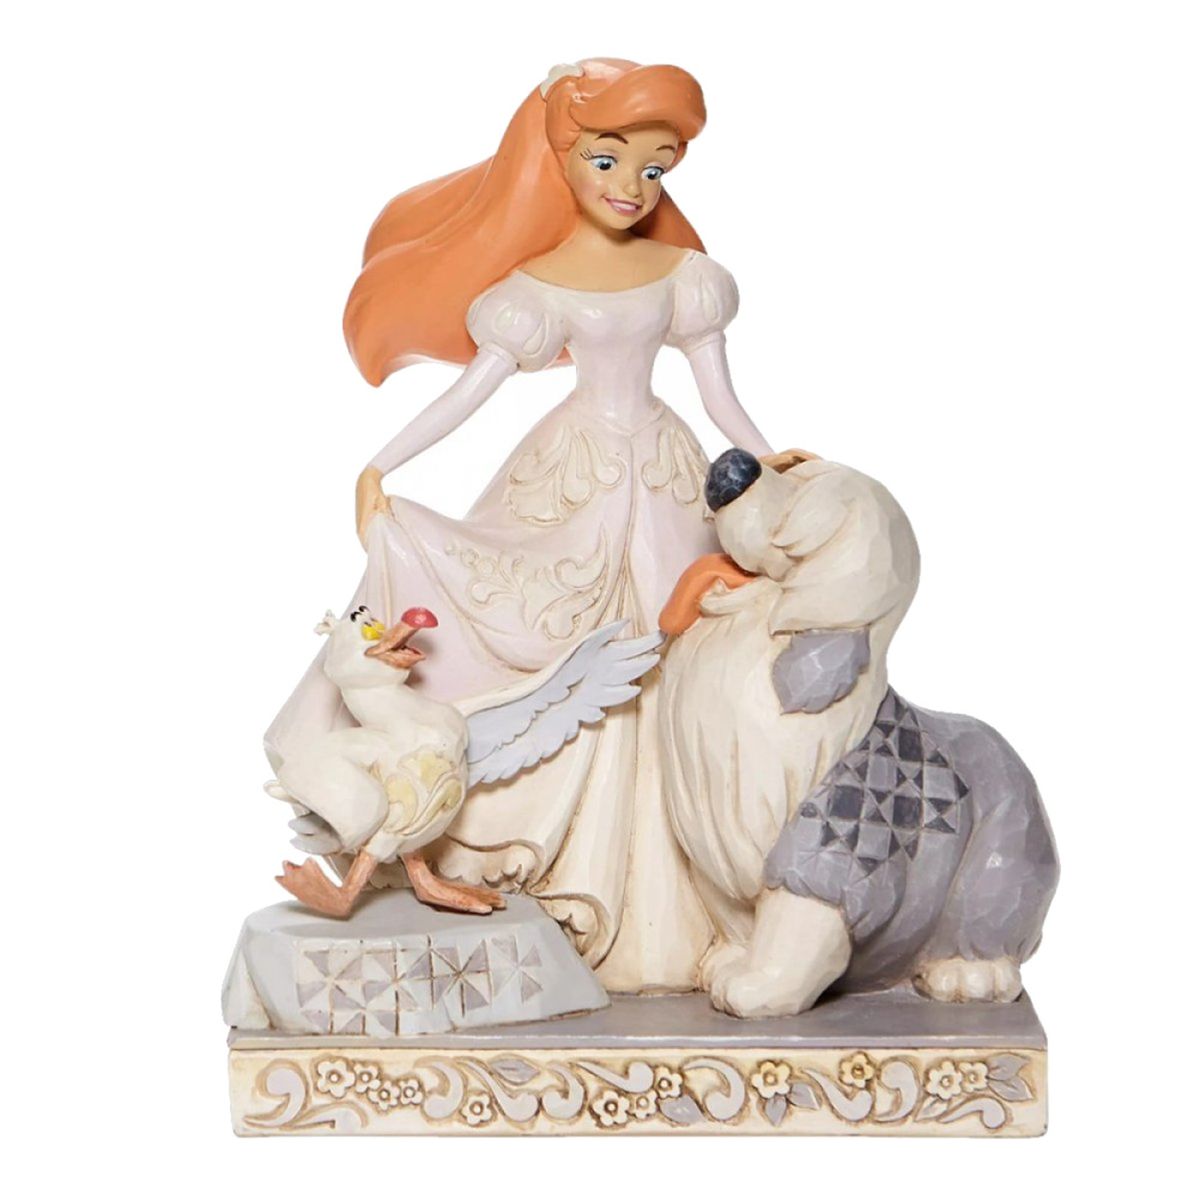 Figurine Ariel Disney Traditions - Fougueuse sirne